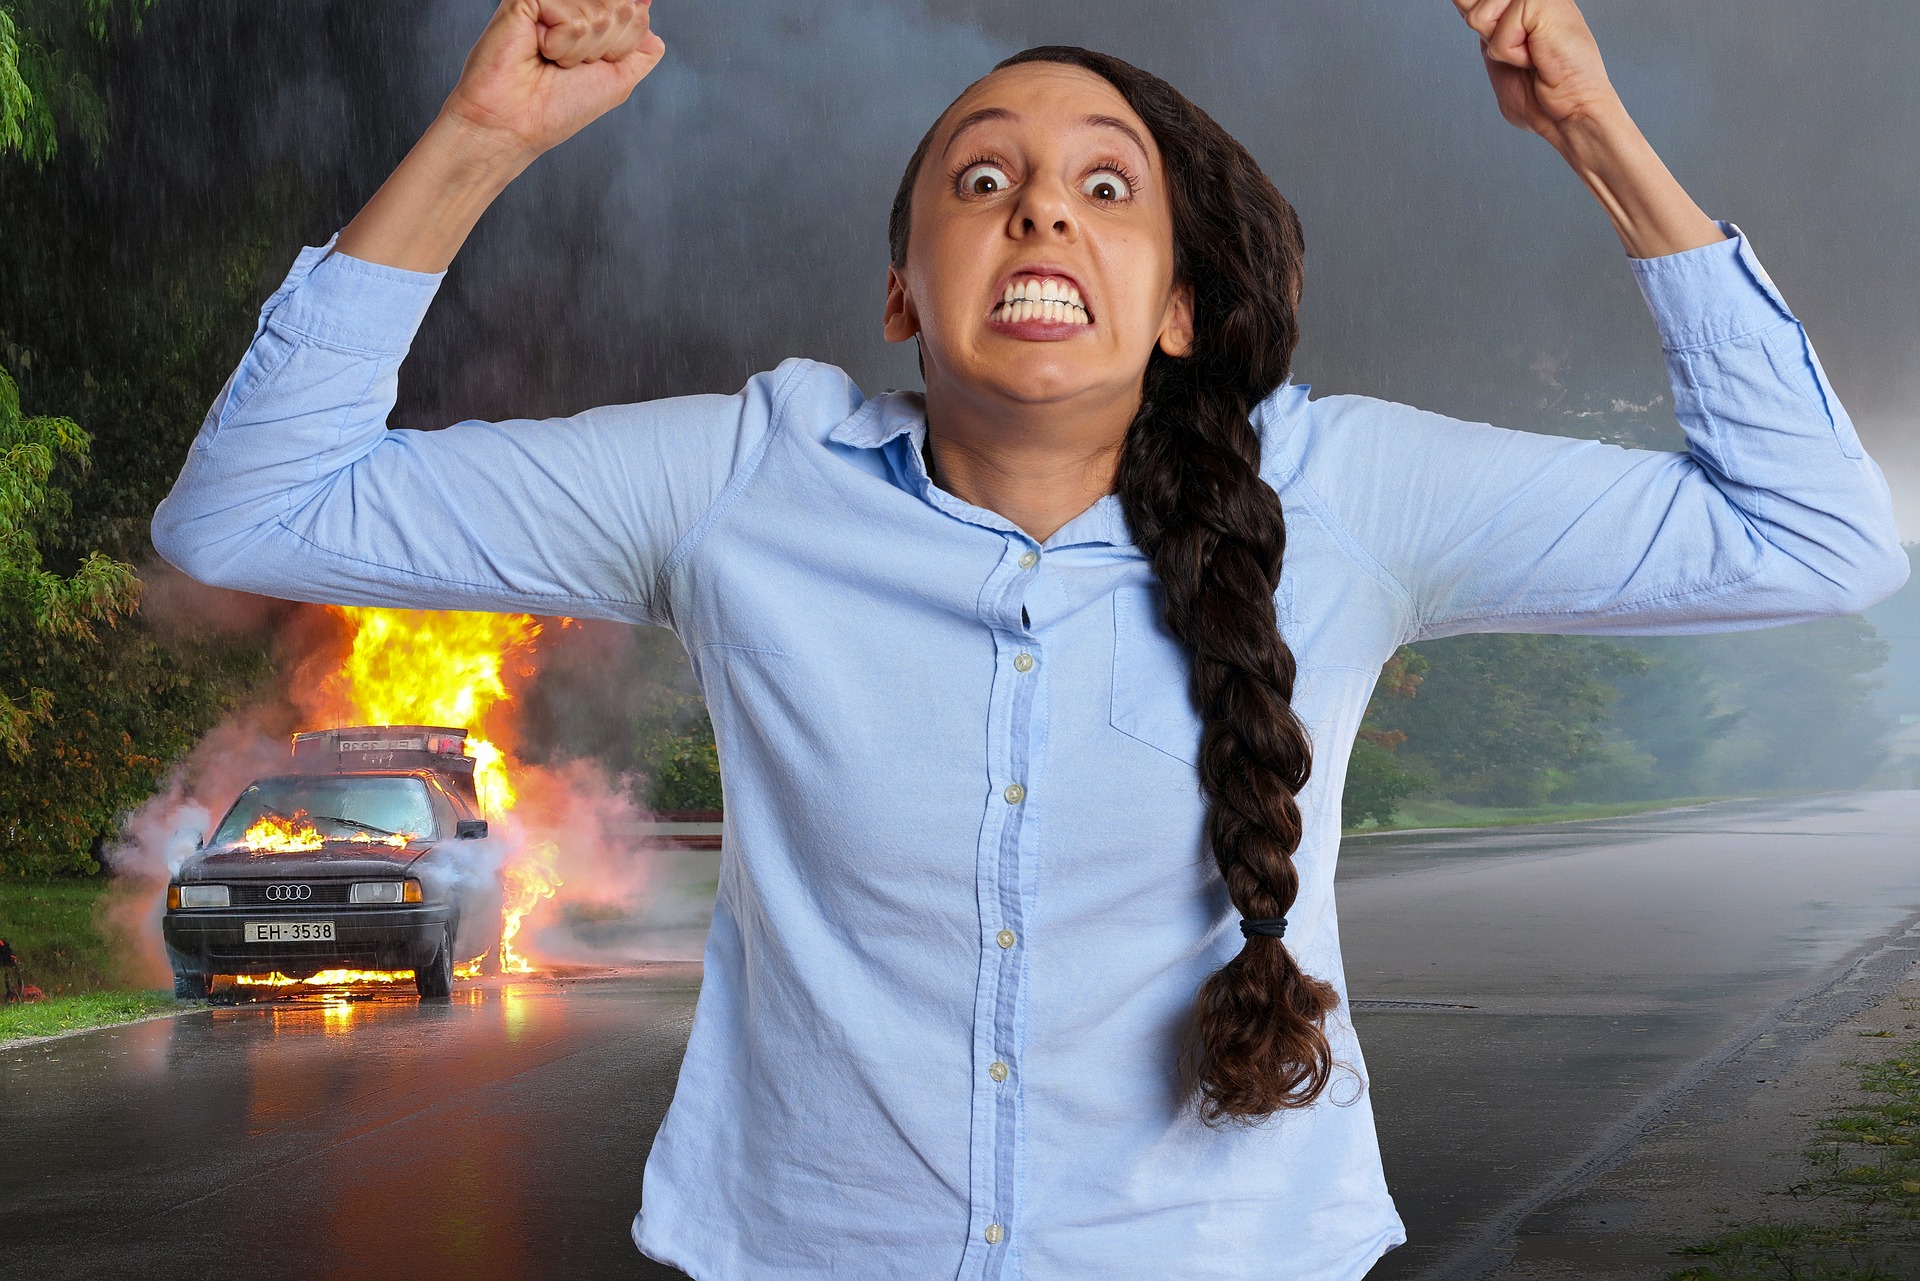 what to do after a car accident